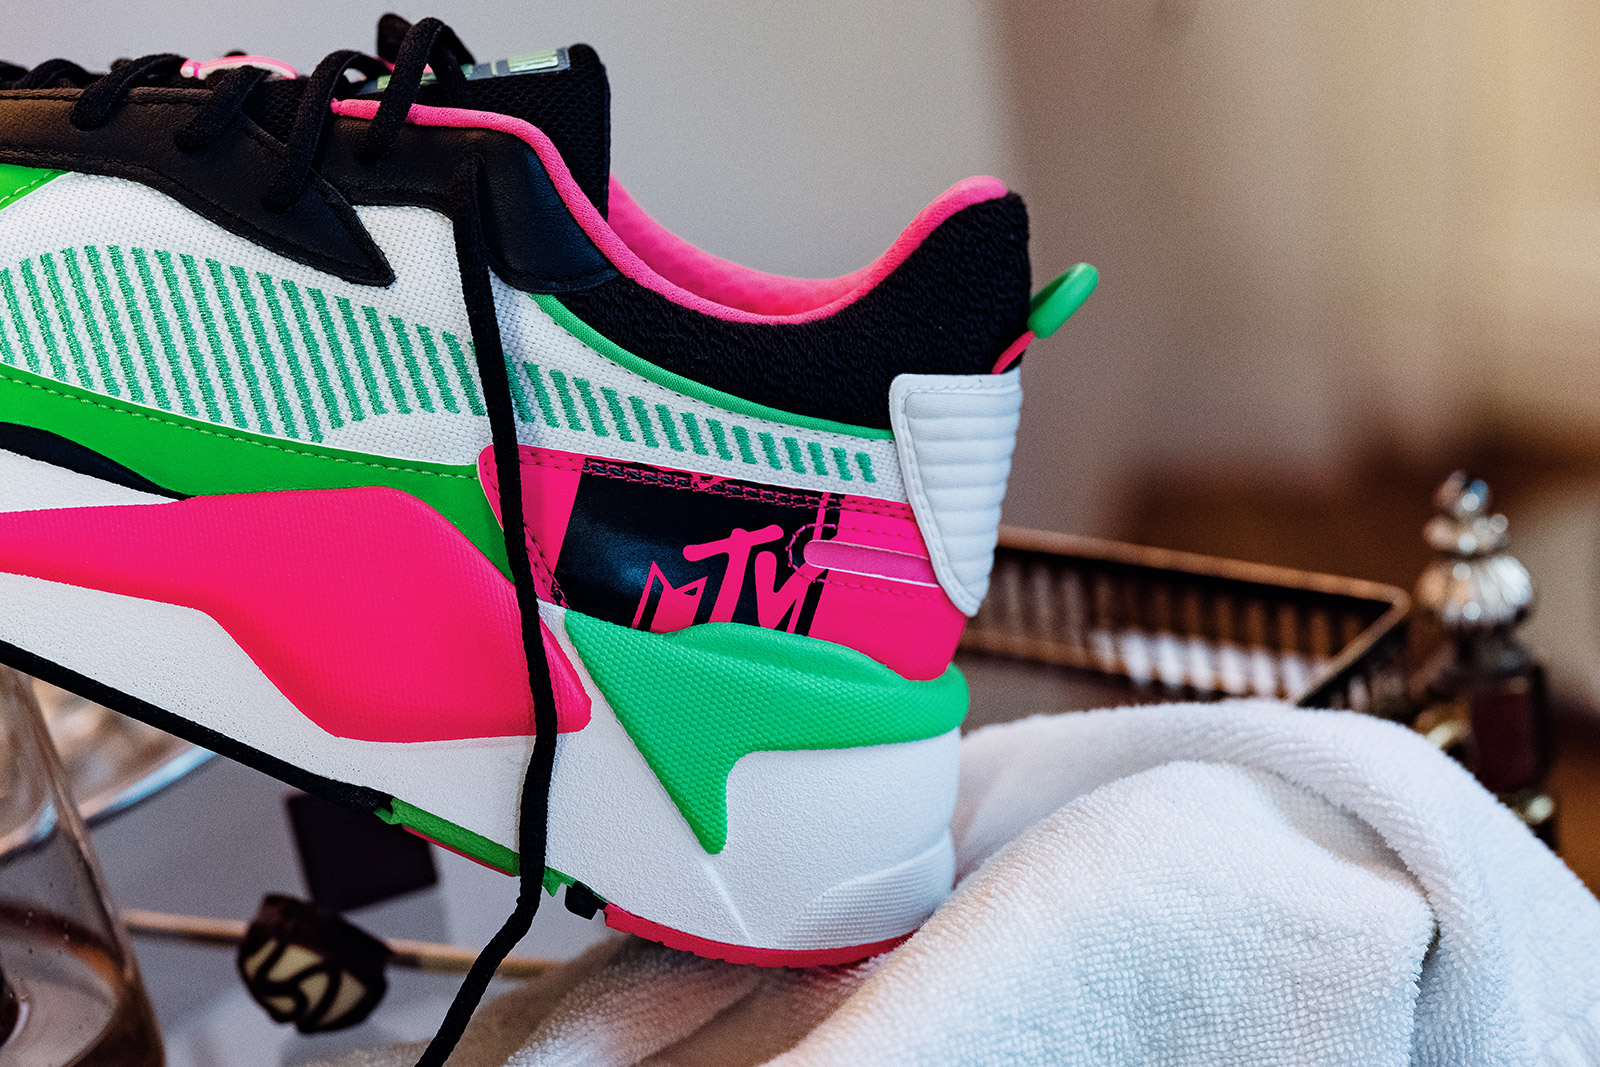 MTV x PUMA RS-X Tracks & Collection Release Date